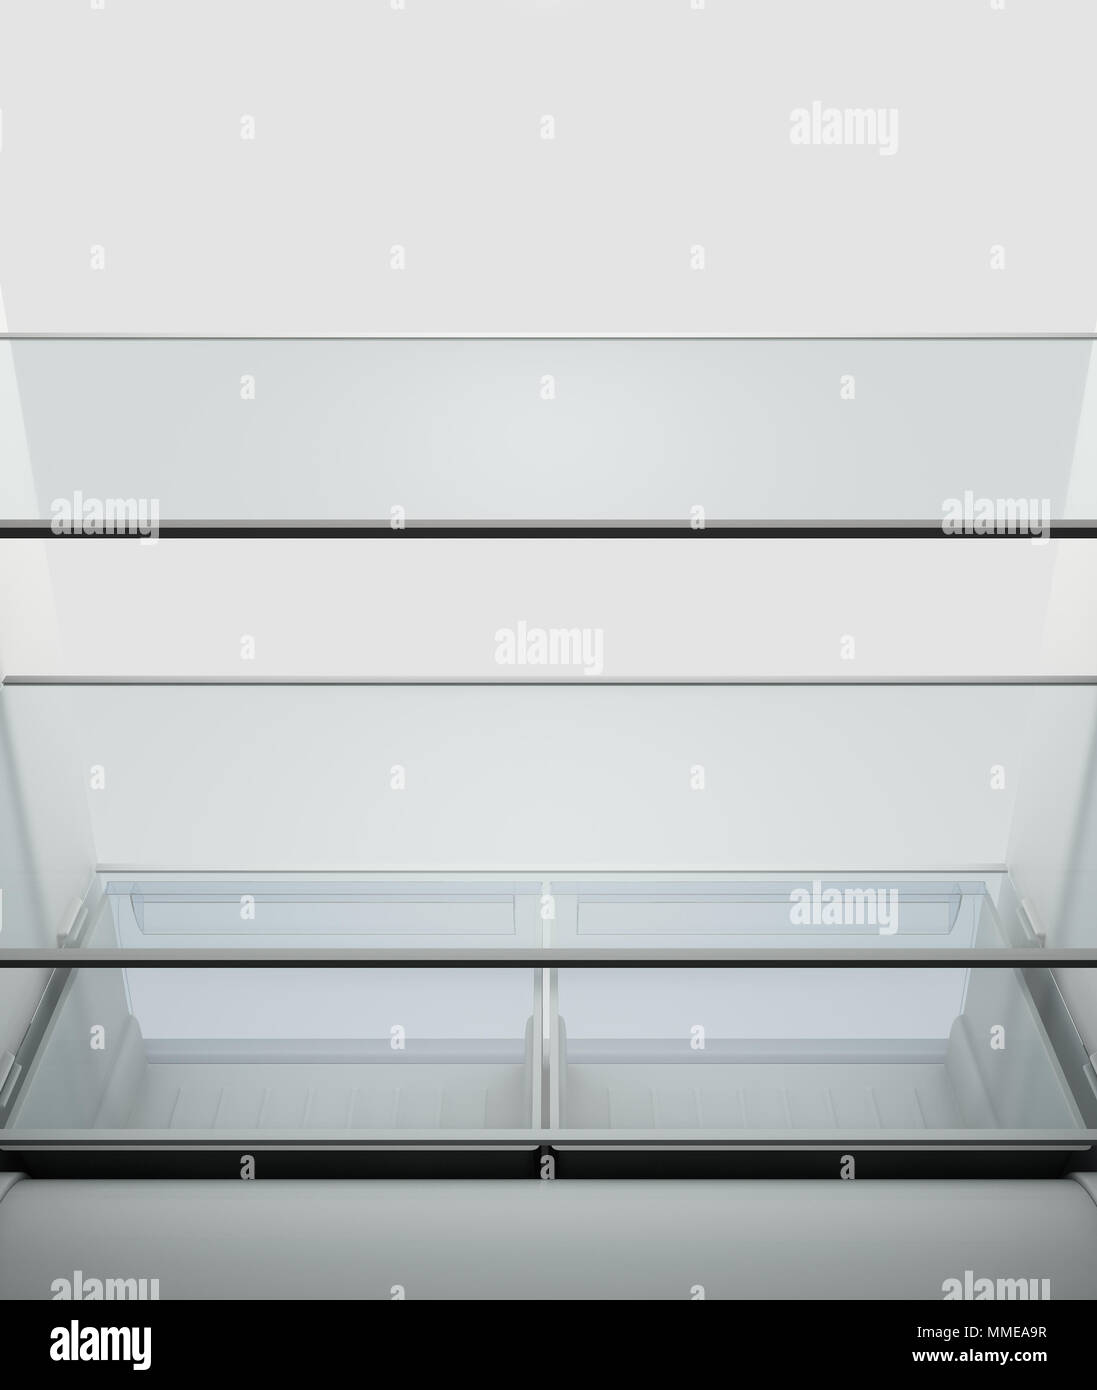 A view from inside an empty household fridge or freezer looking out the open door - 3D render Stock Photo